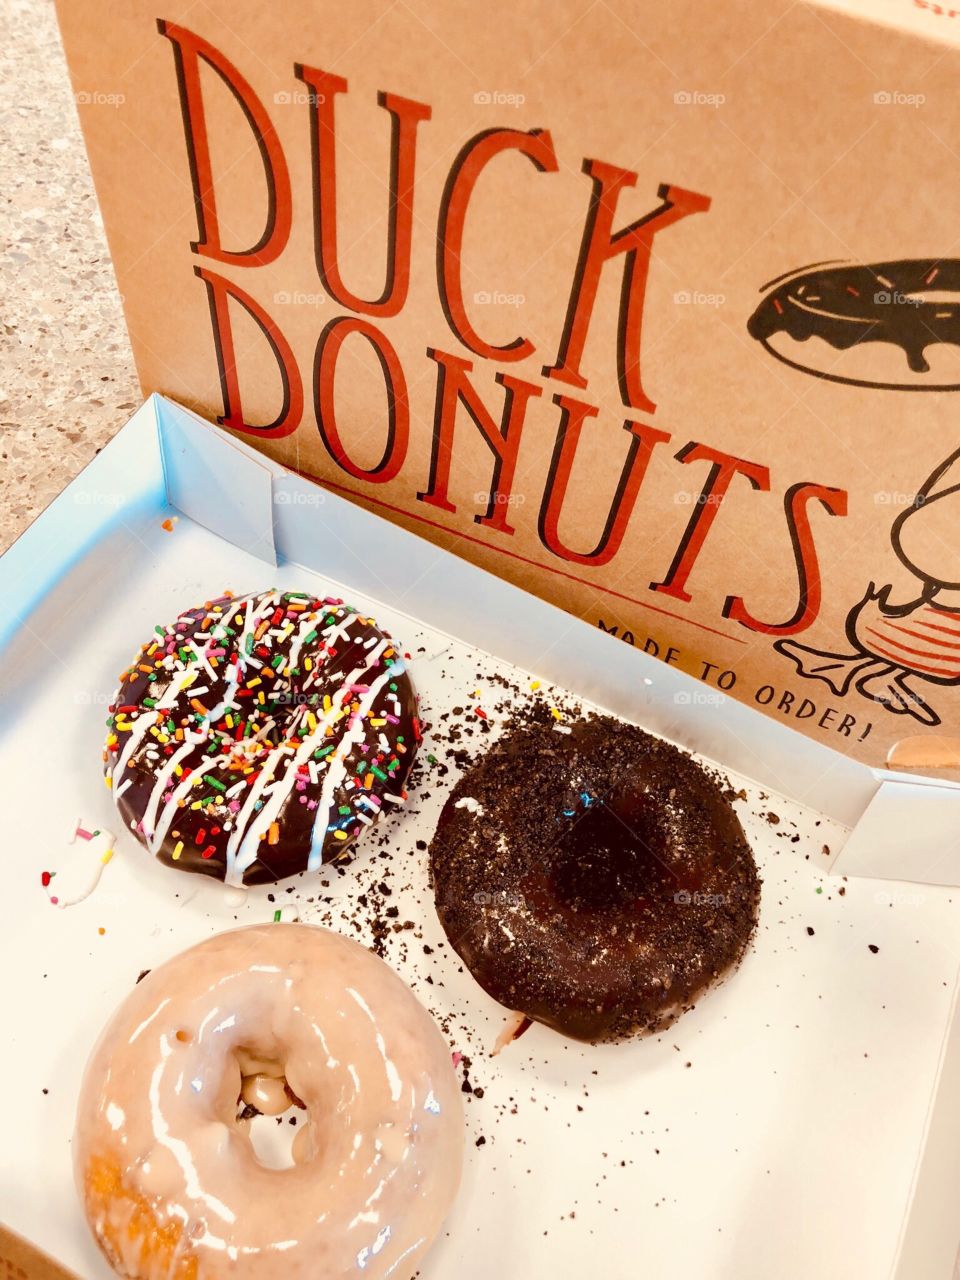 Duck donuts! 🍩